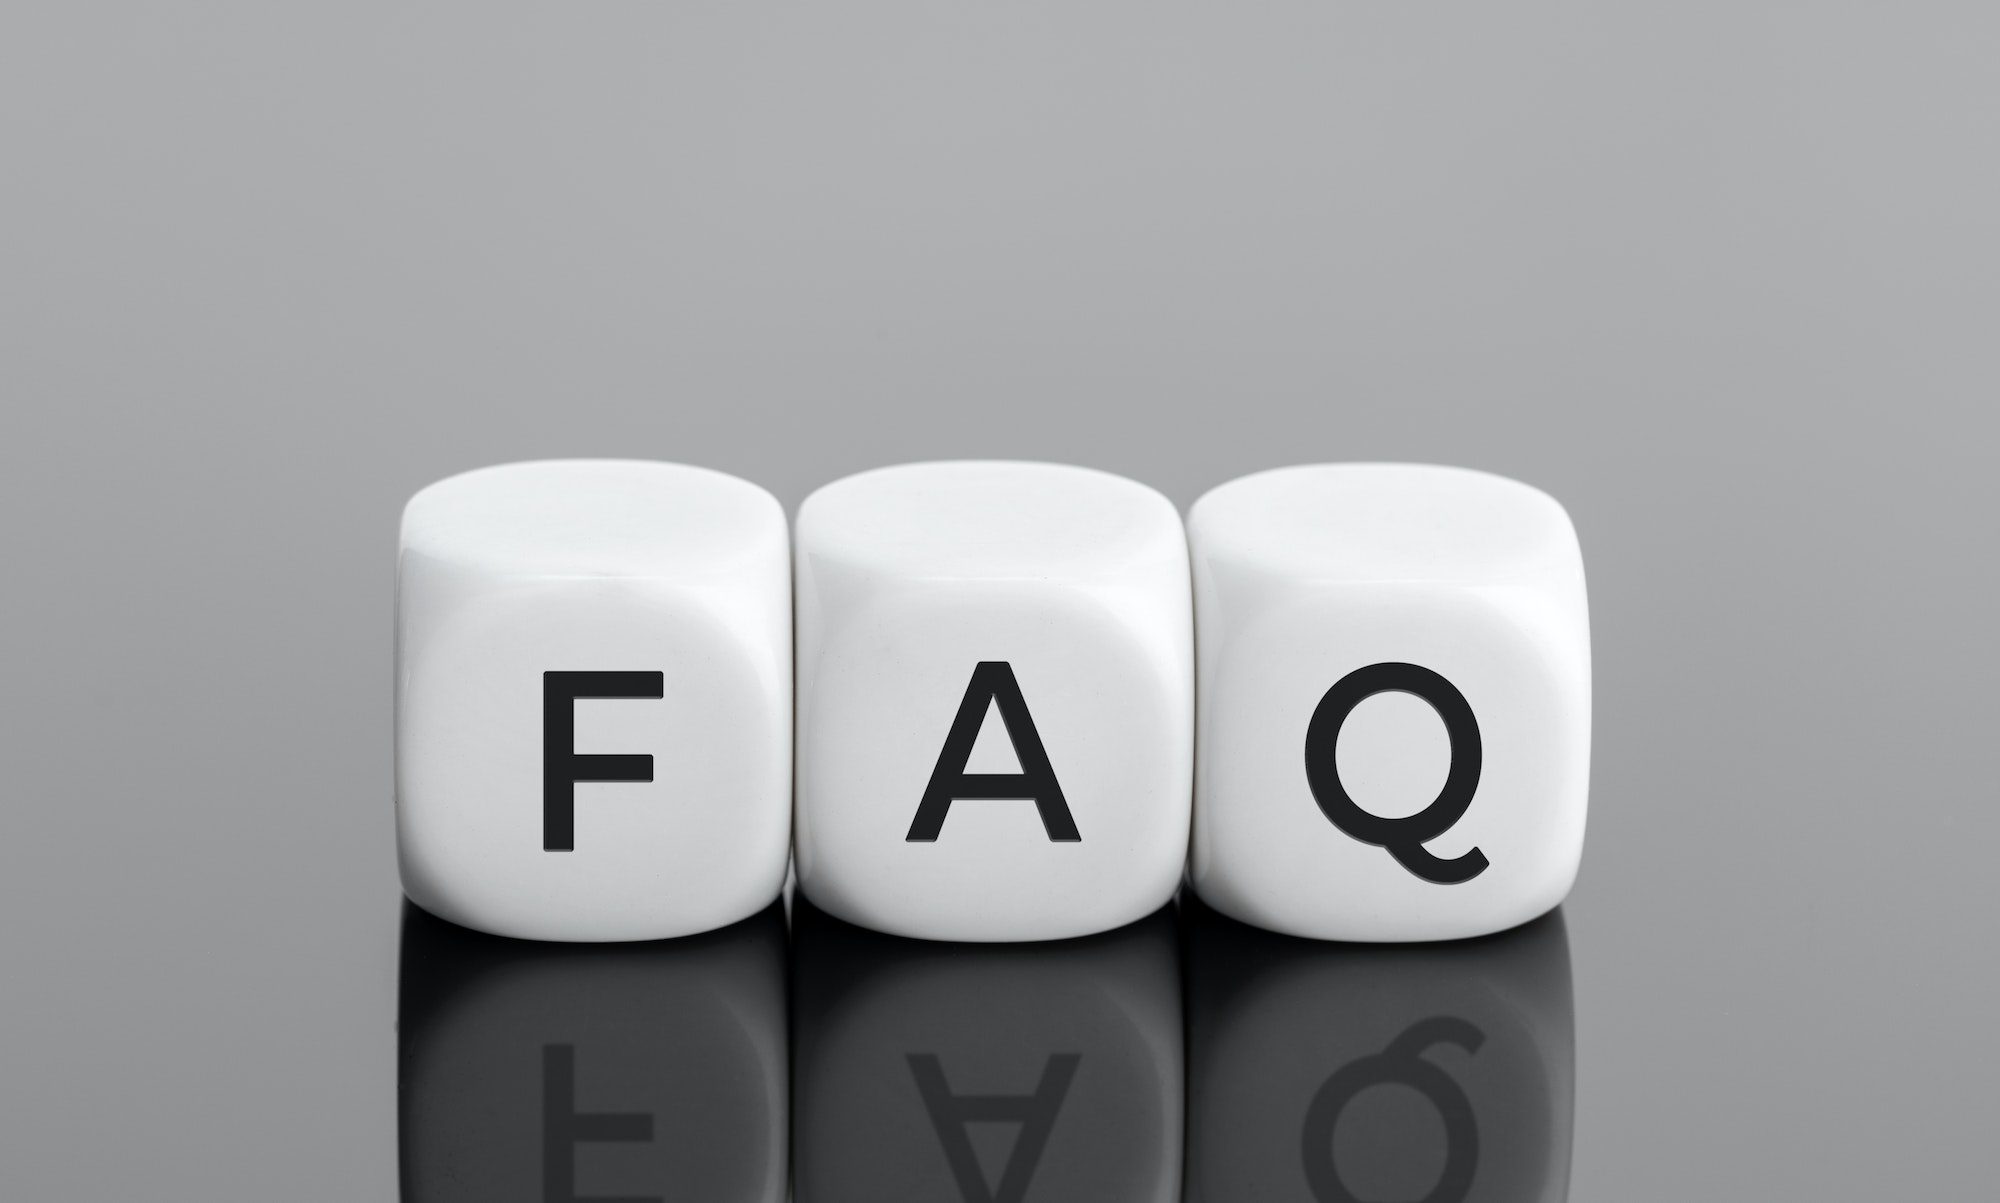 FAQ or frequently asked question concept